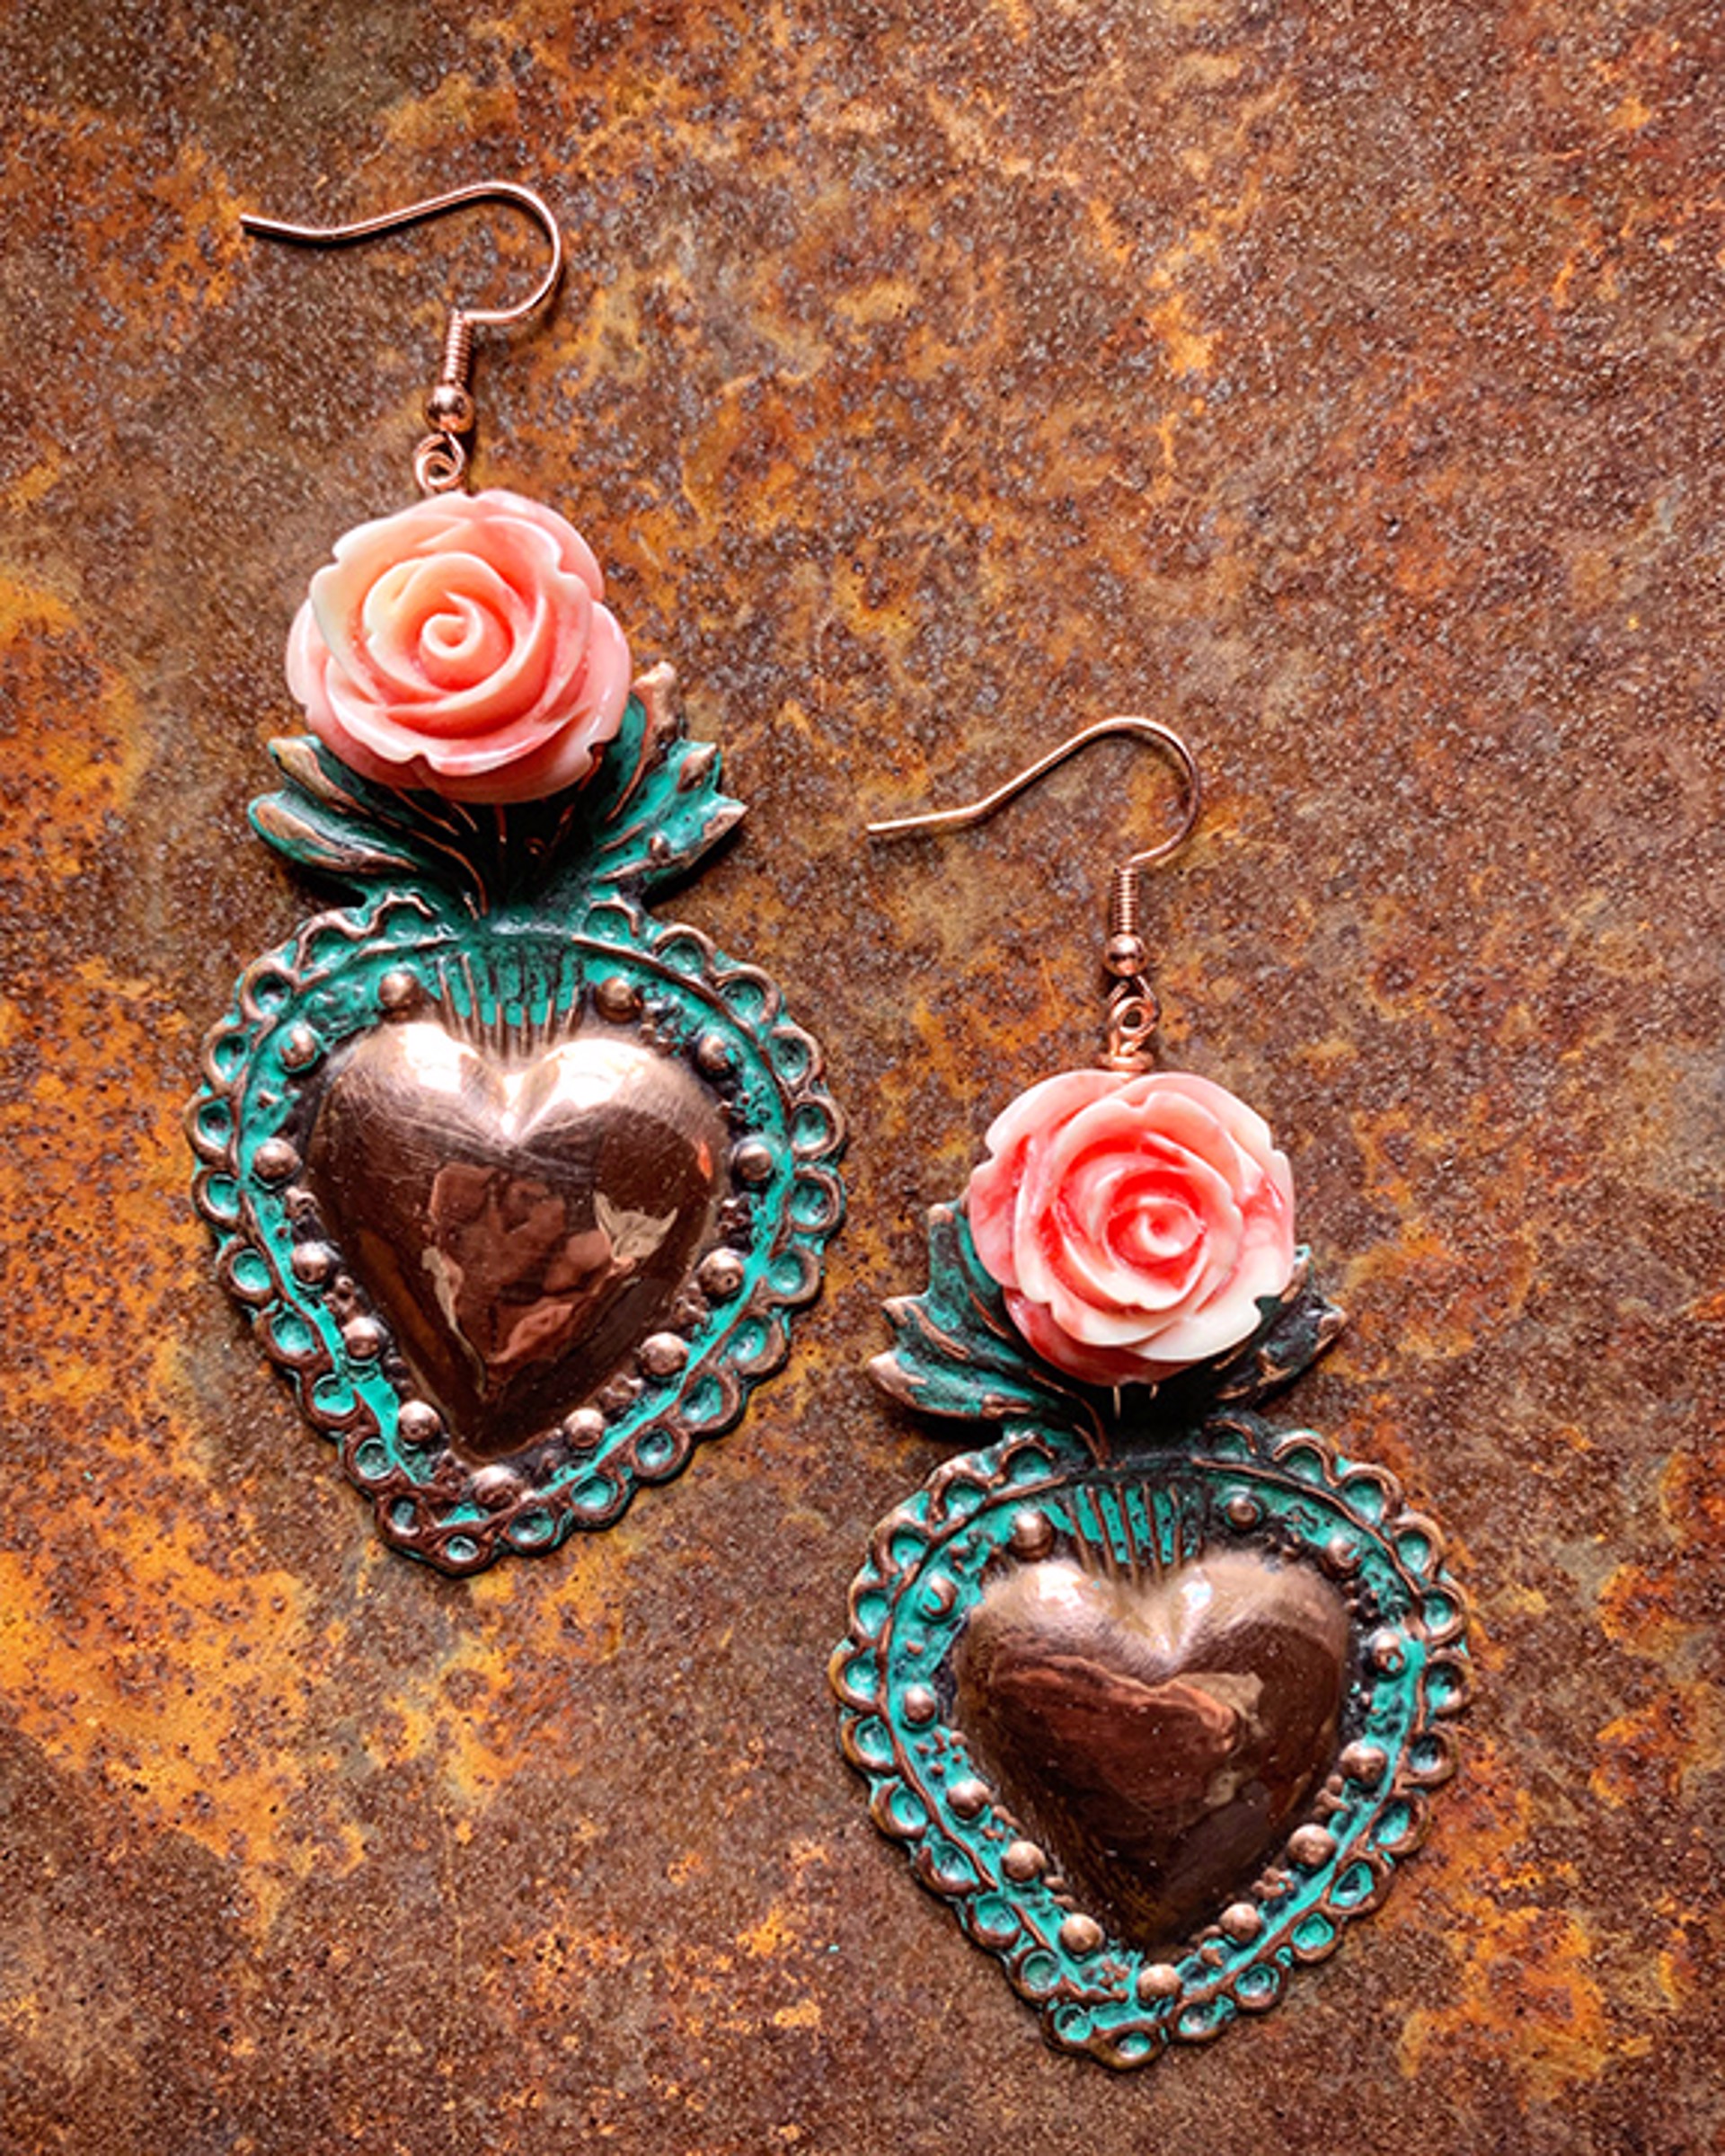 K722 Sacred Heart Earrings with Pink Roses by Kelly Ormsby